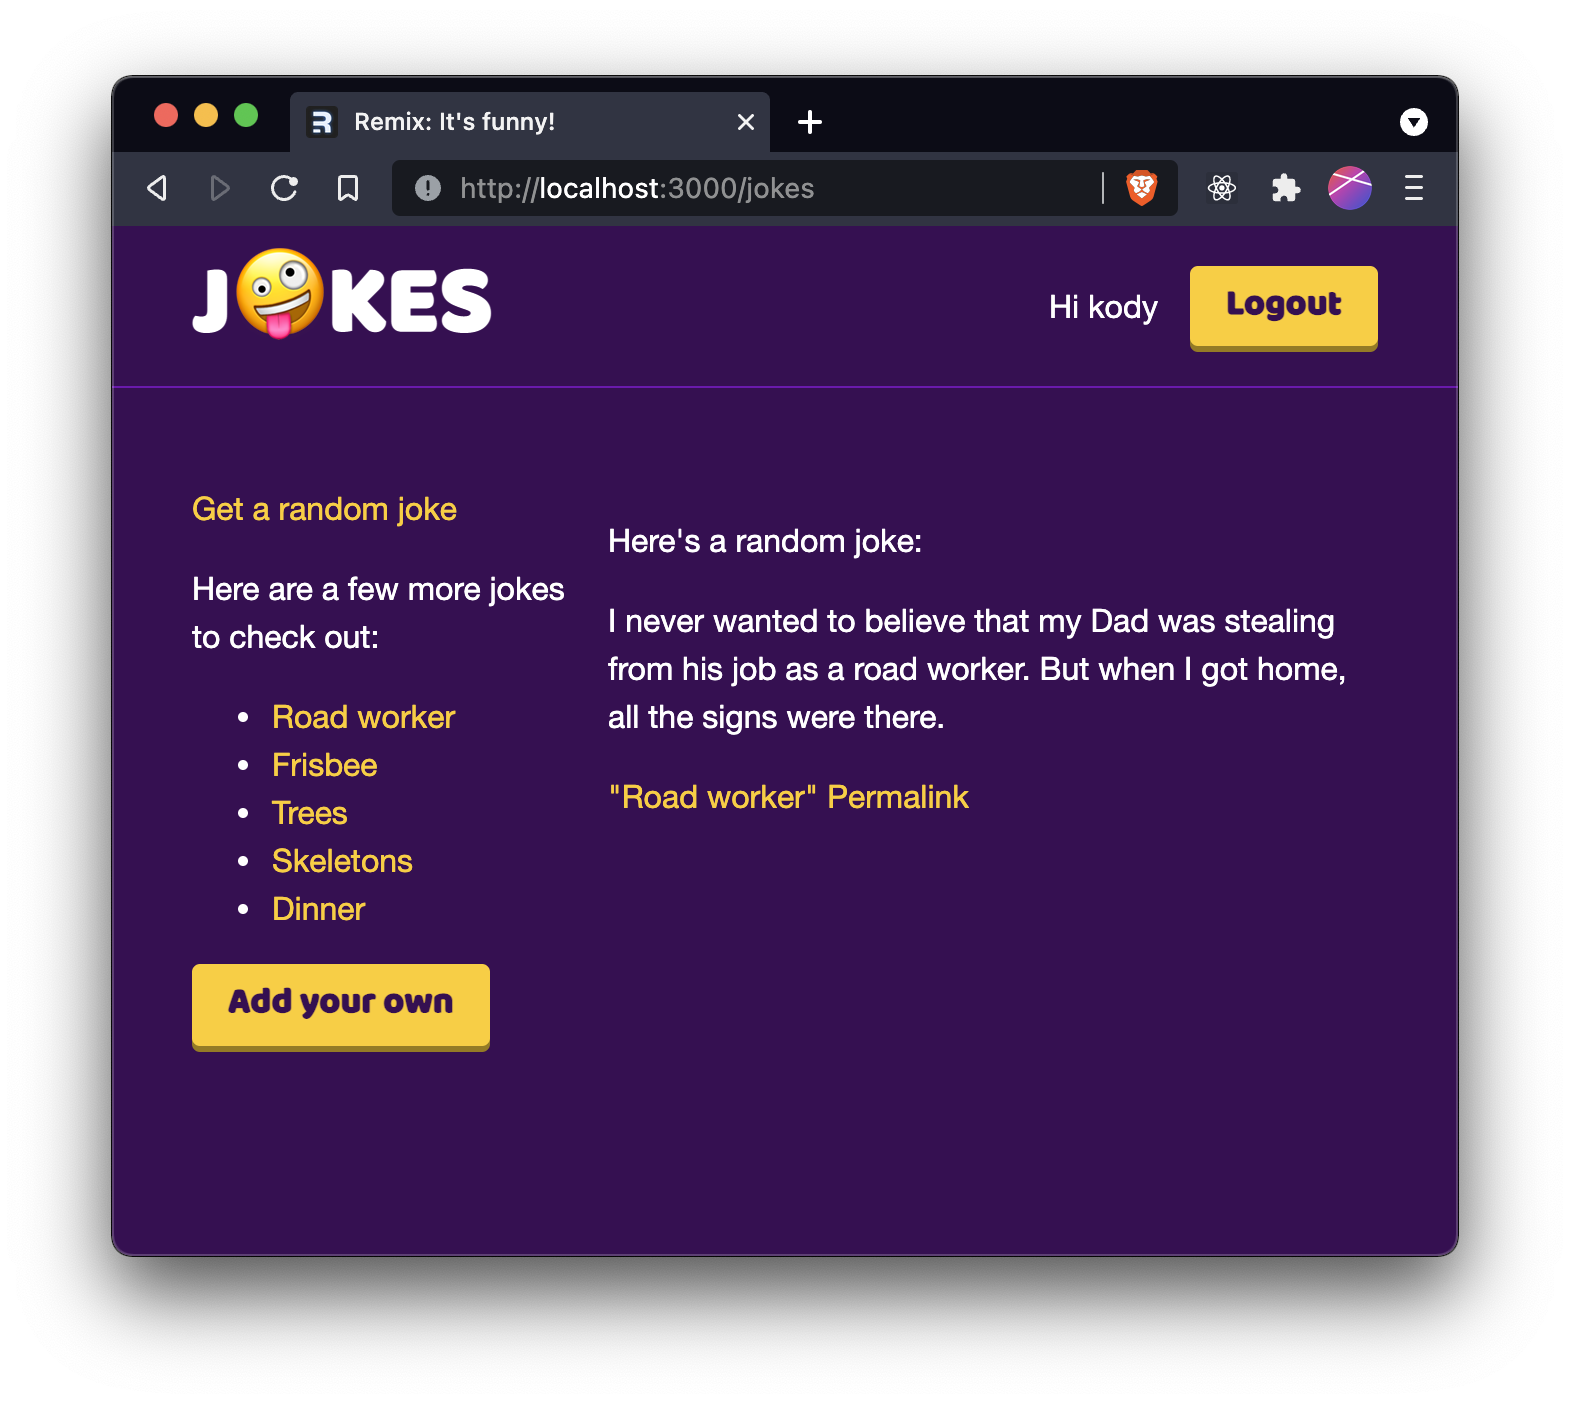 Jokes page nice and designed